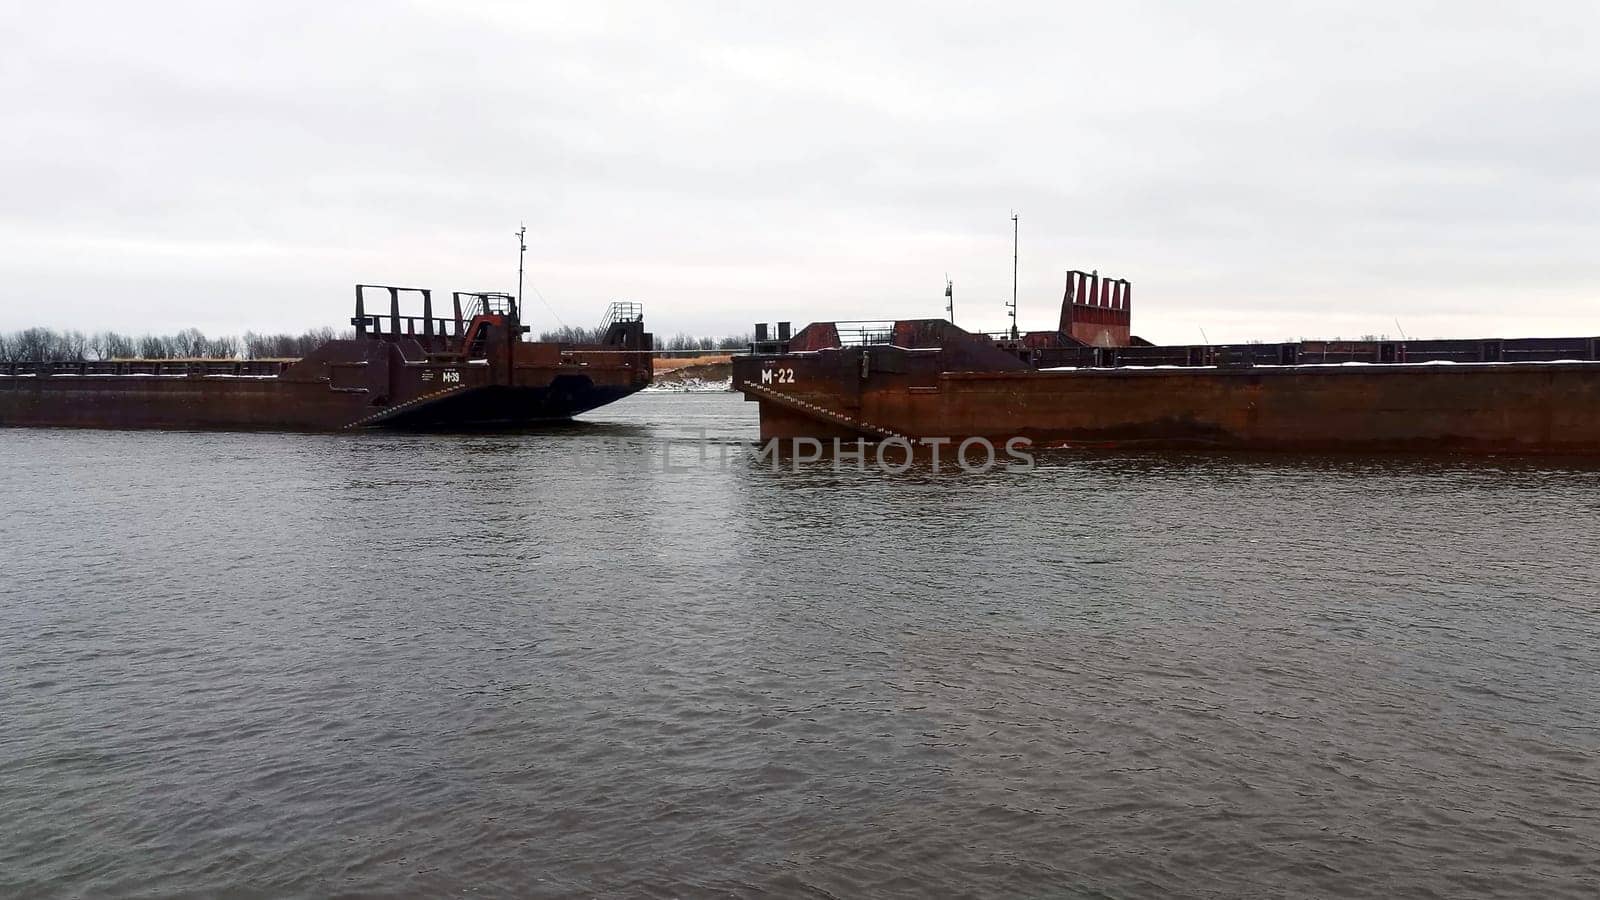 Sea transportation with barges. Clip. Floating barges for cargo transportation on river in winter. Barges on river on cloudy winter day by Mediawhalestock